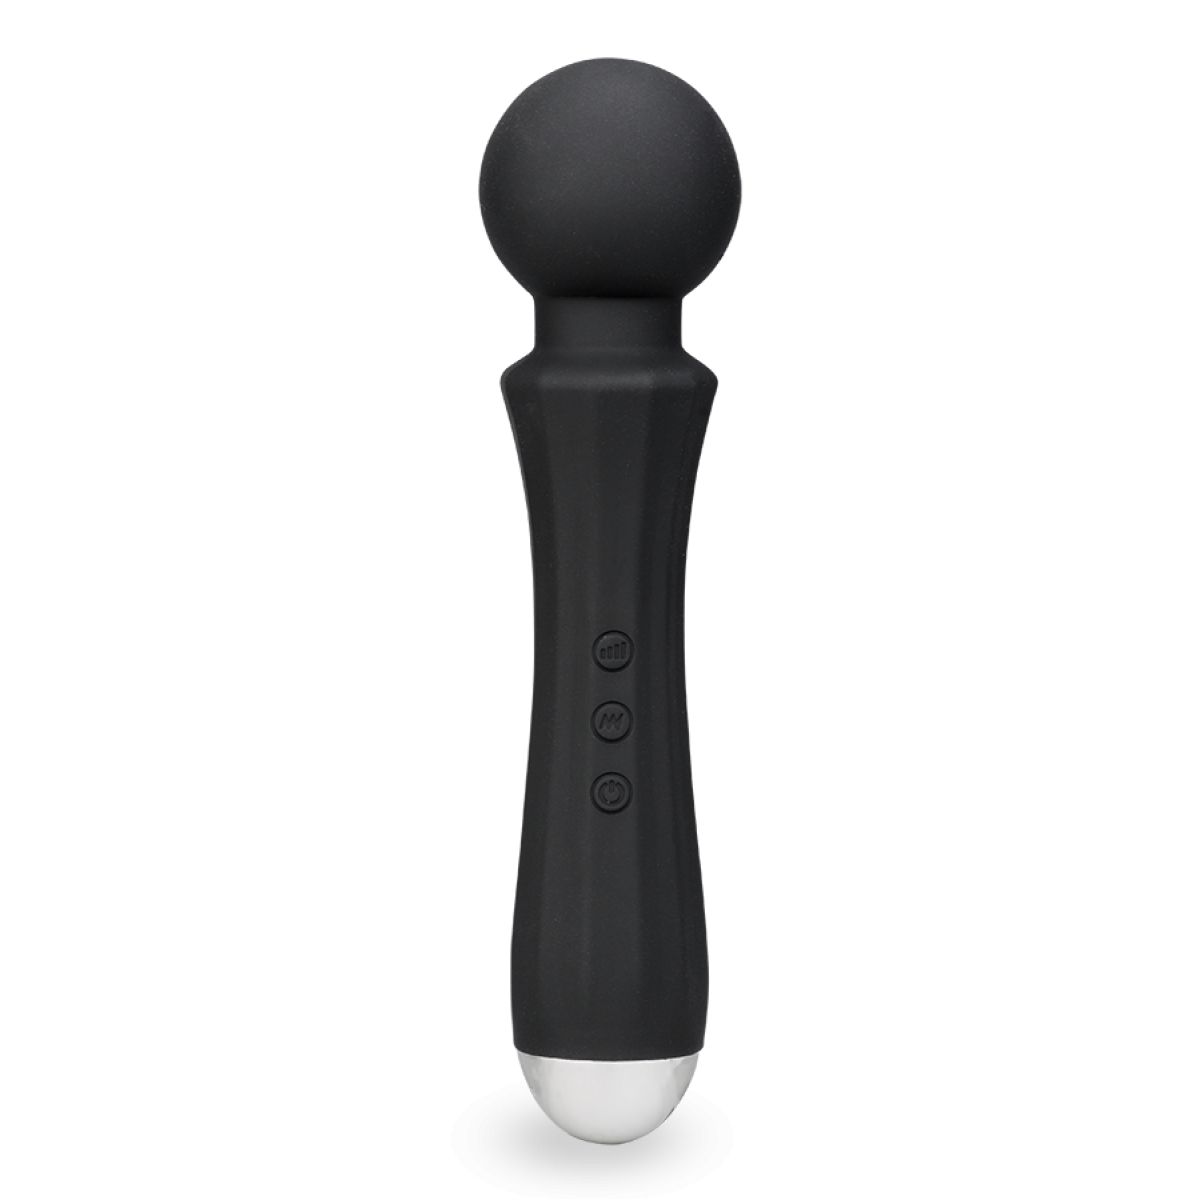 Vibromasseur Vibro Puissant Gode De Luxe Fantasy Wand Witcher Love And Vibes La Redoute 